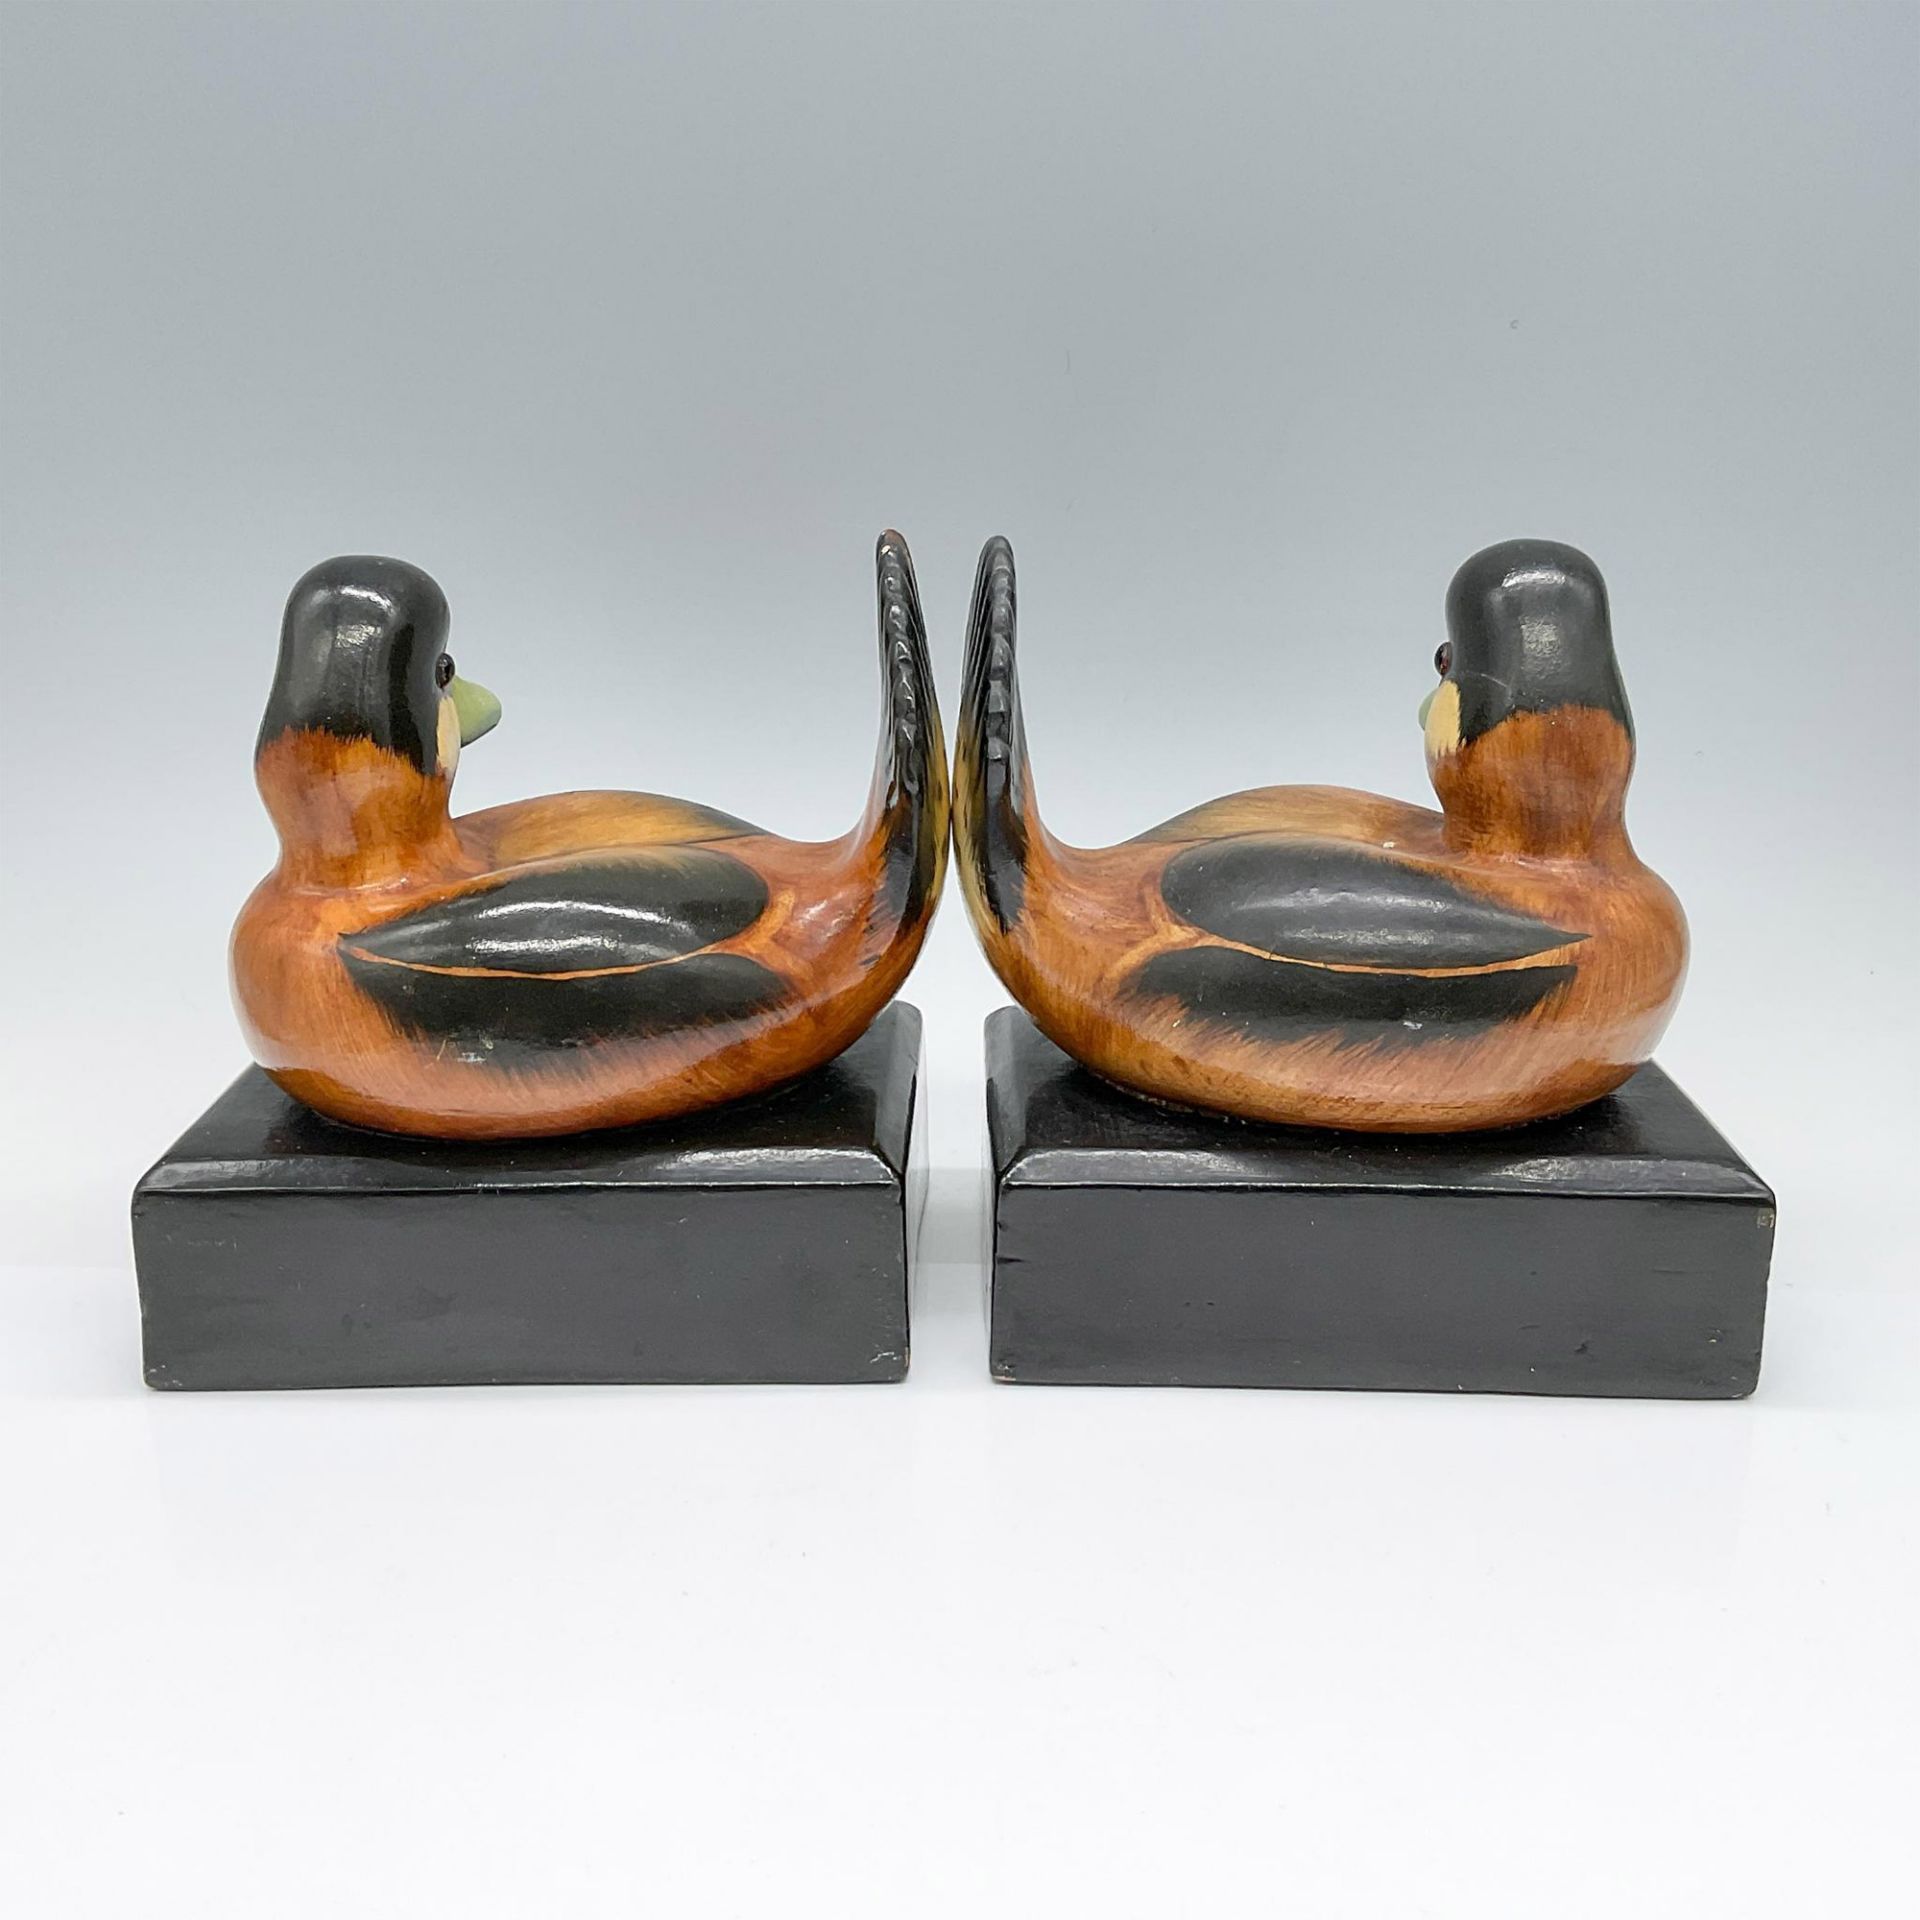 Pair of Vintage Italian Ceramic Duck Bookends - Image 2 of 3